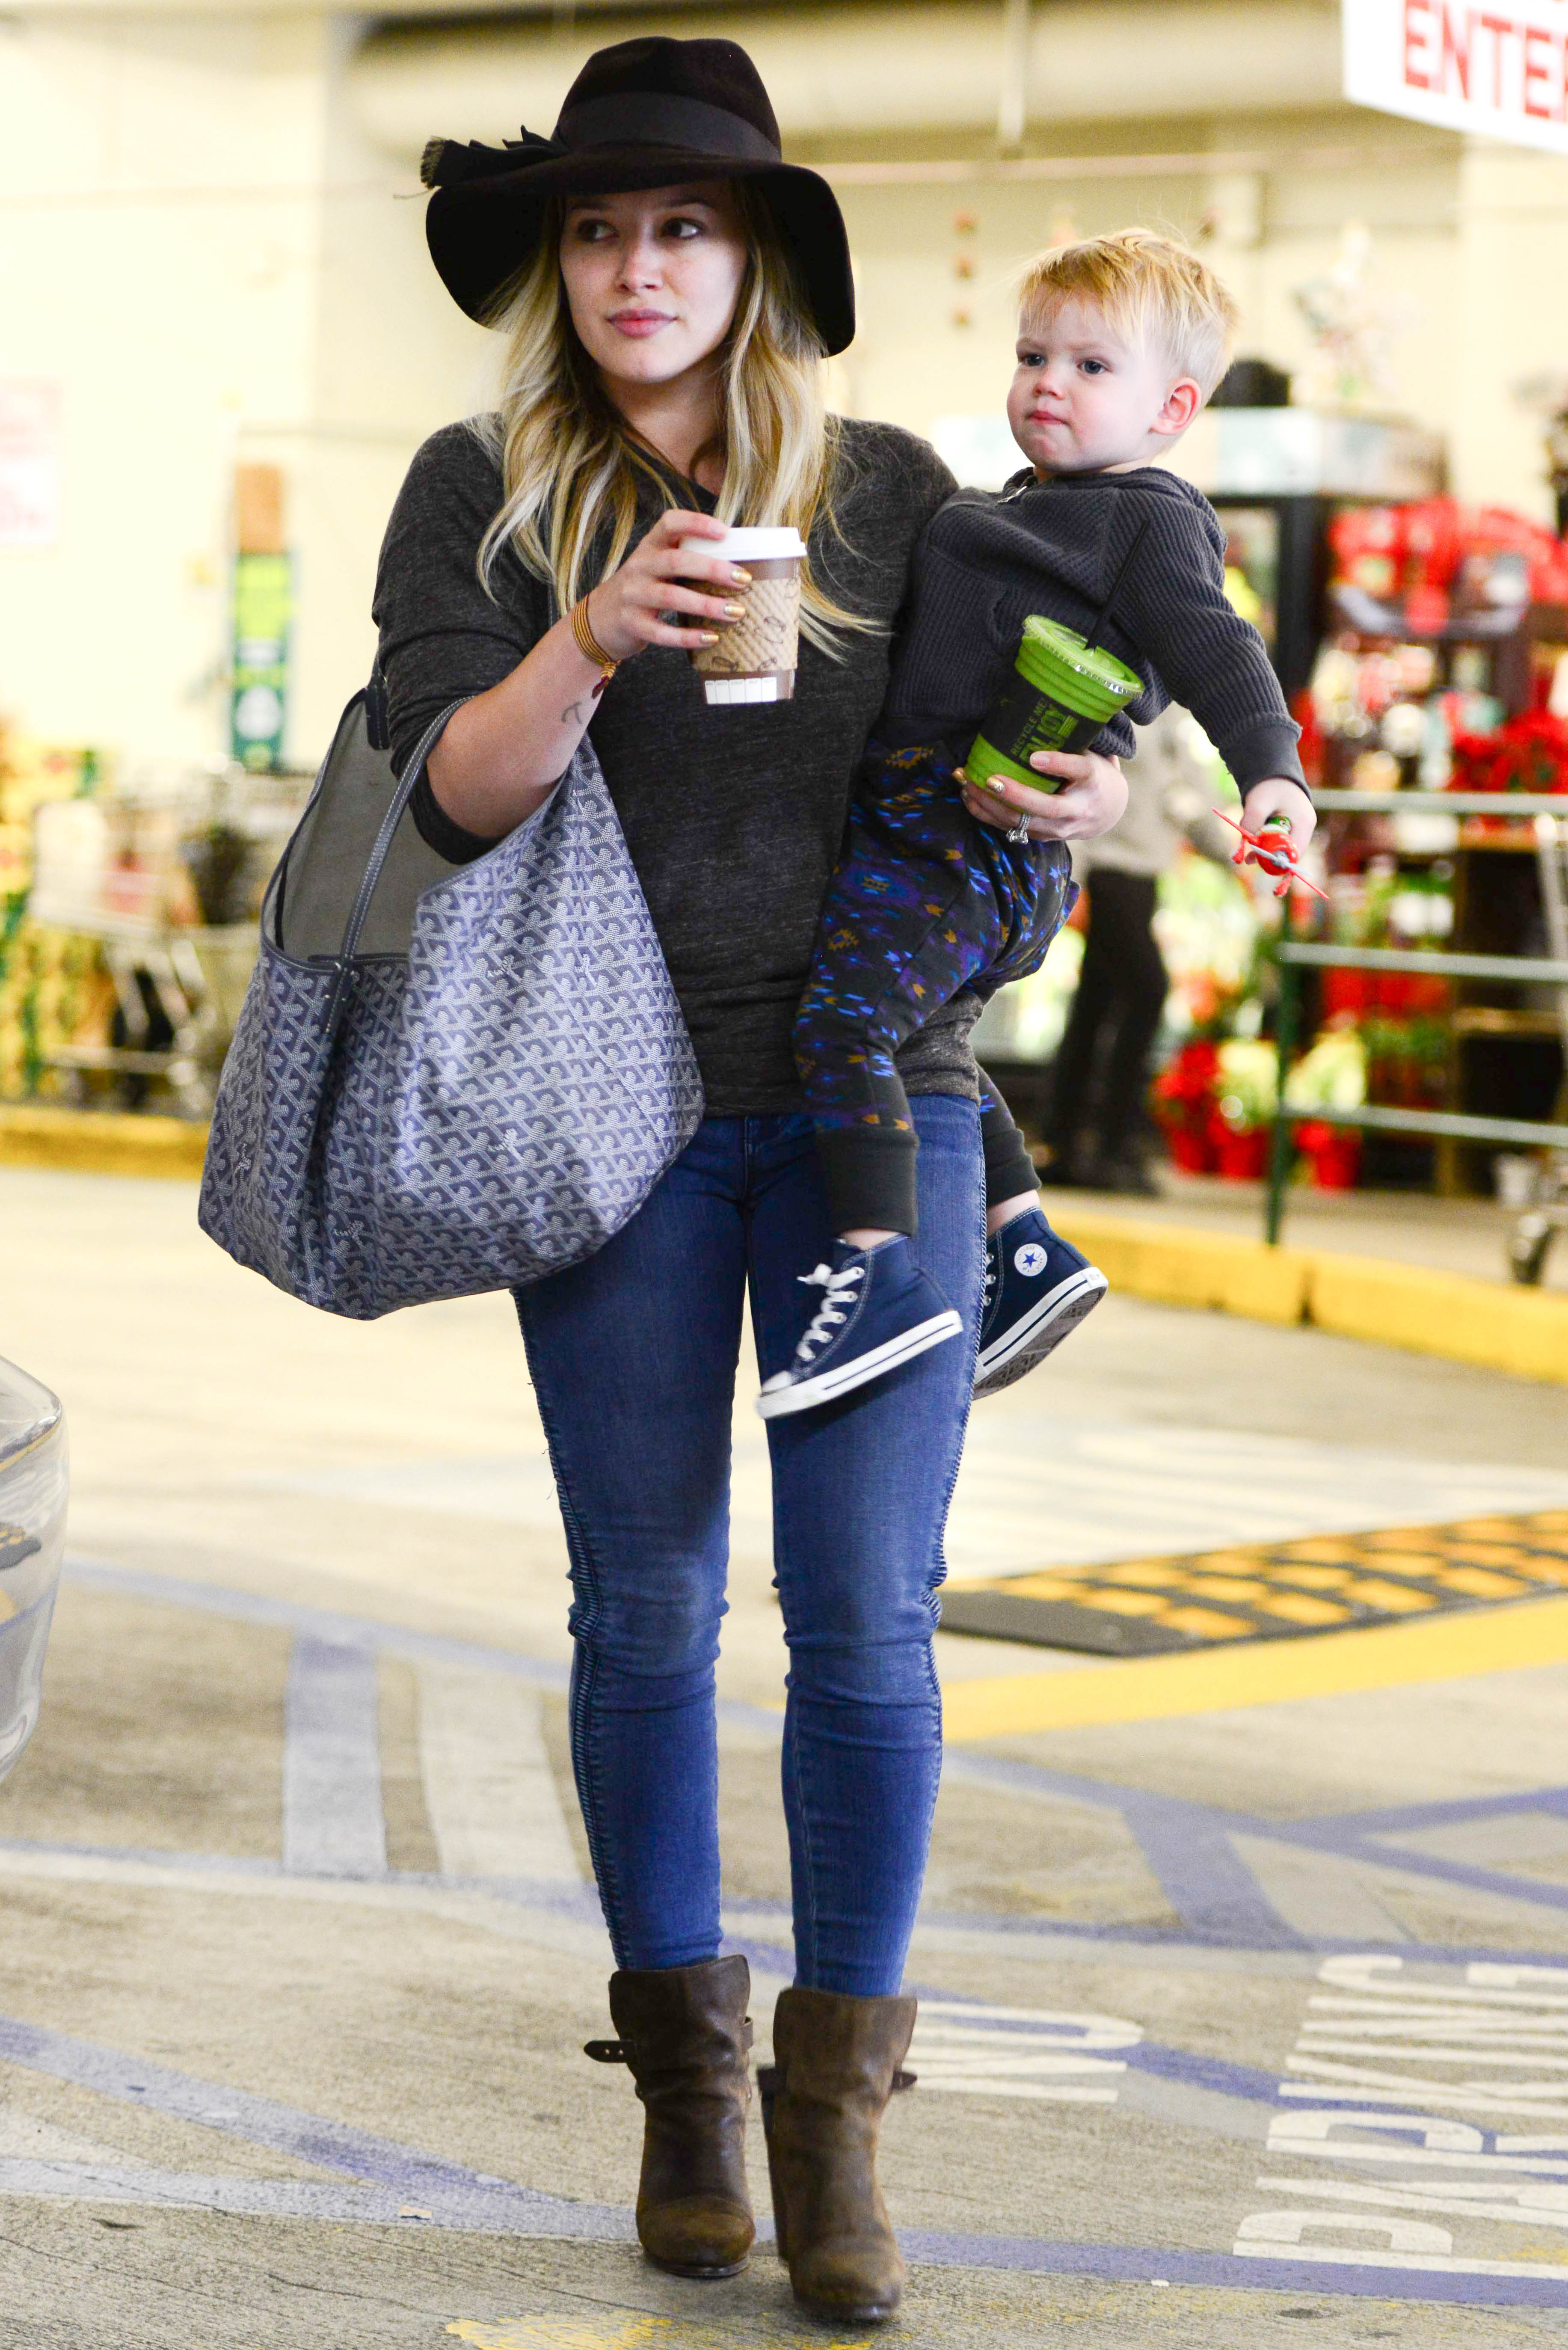 Hilary Duff Los Angeles March 6, 2013 – Star Style